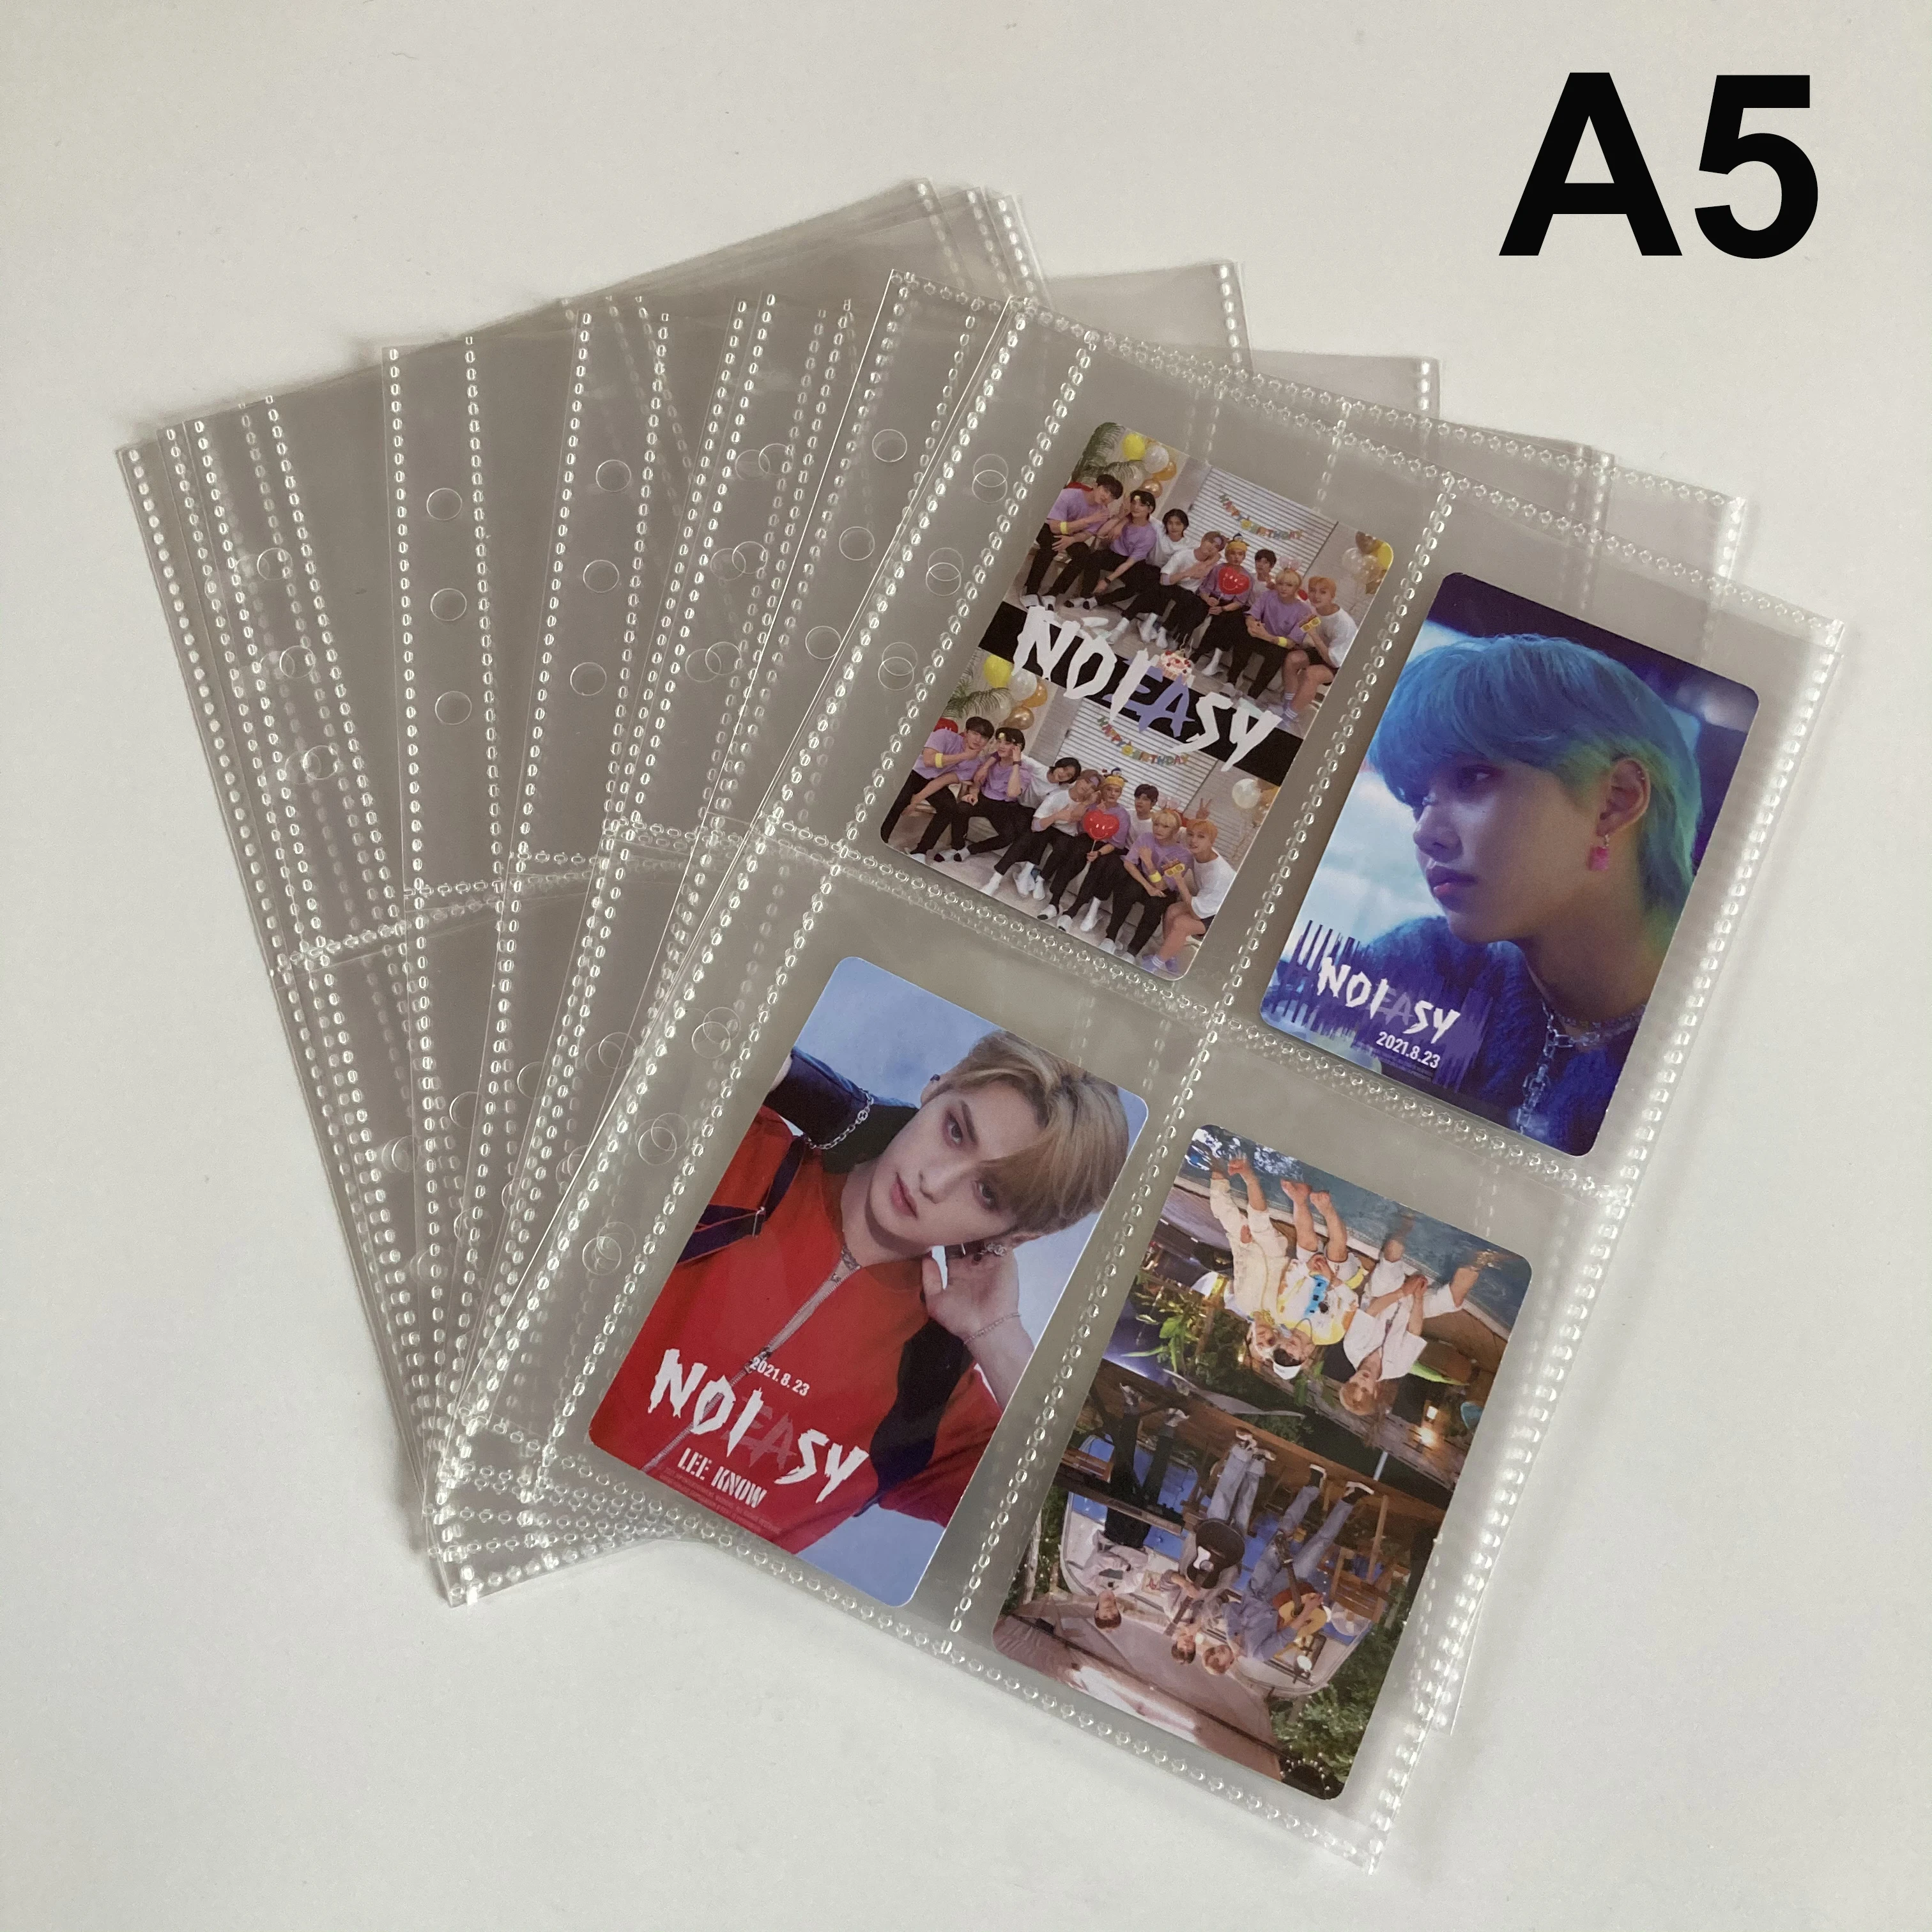 A5 Binder Sleeves Double Sided 1 2 4 Pockets Clear Kpop Photocard Postcard Trading Card Photo Album Sleeves Refill Page PVC Free 30 pcs card holder clear protective sleeves for collectible trading basketball sports cards 35pt rigid plastic